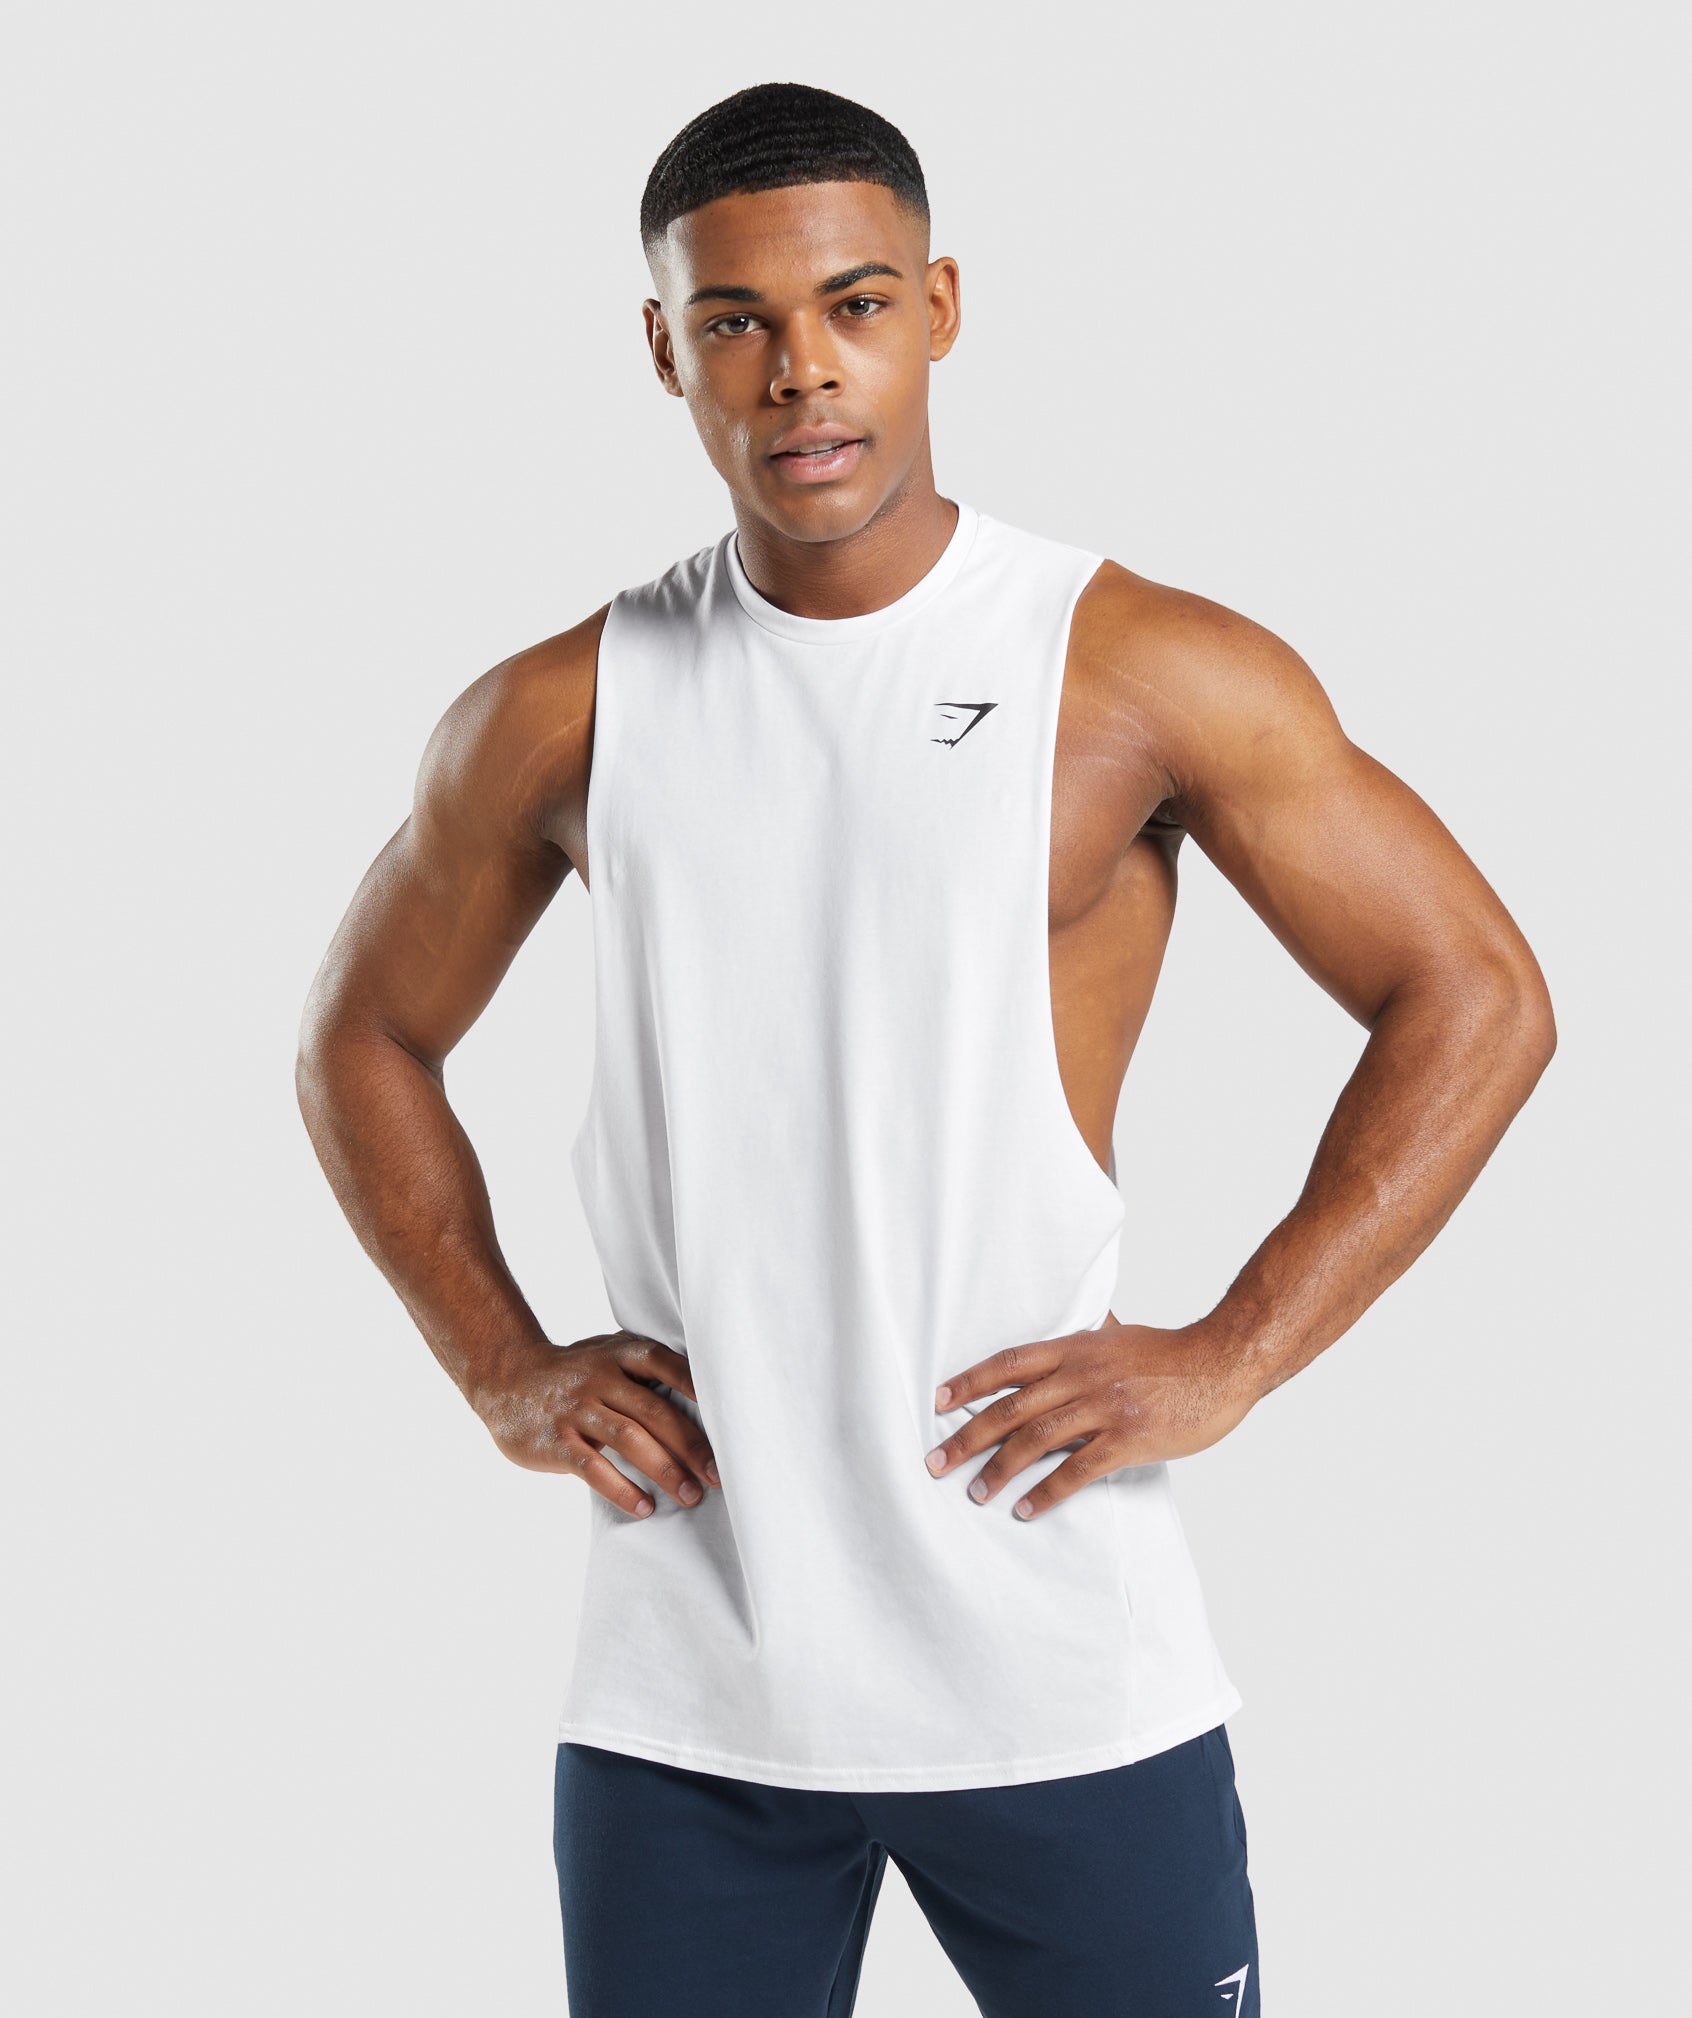 Critical Drop Arm Tank in White is out of stock